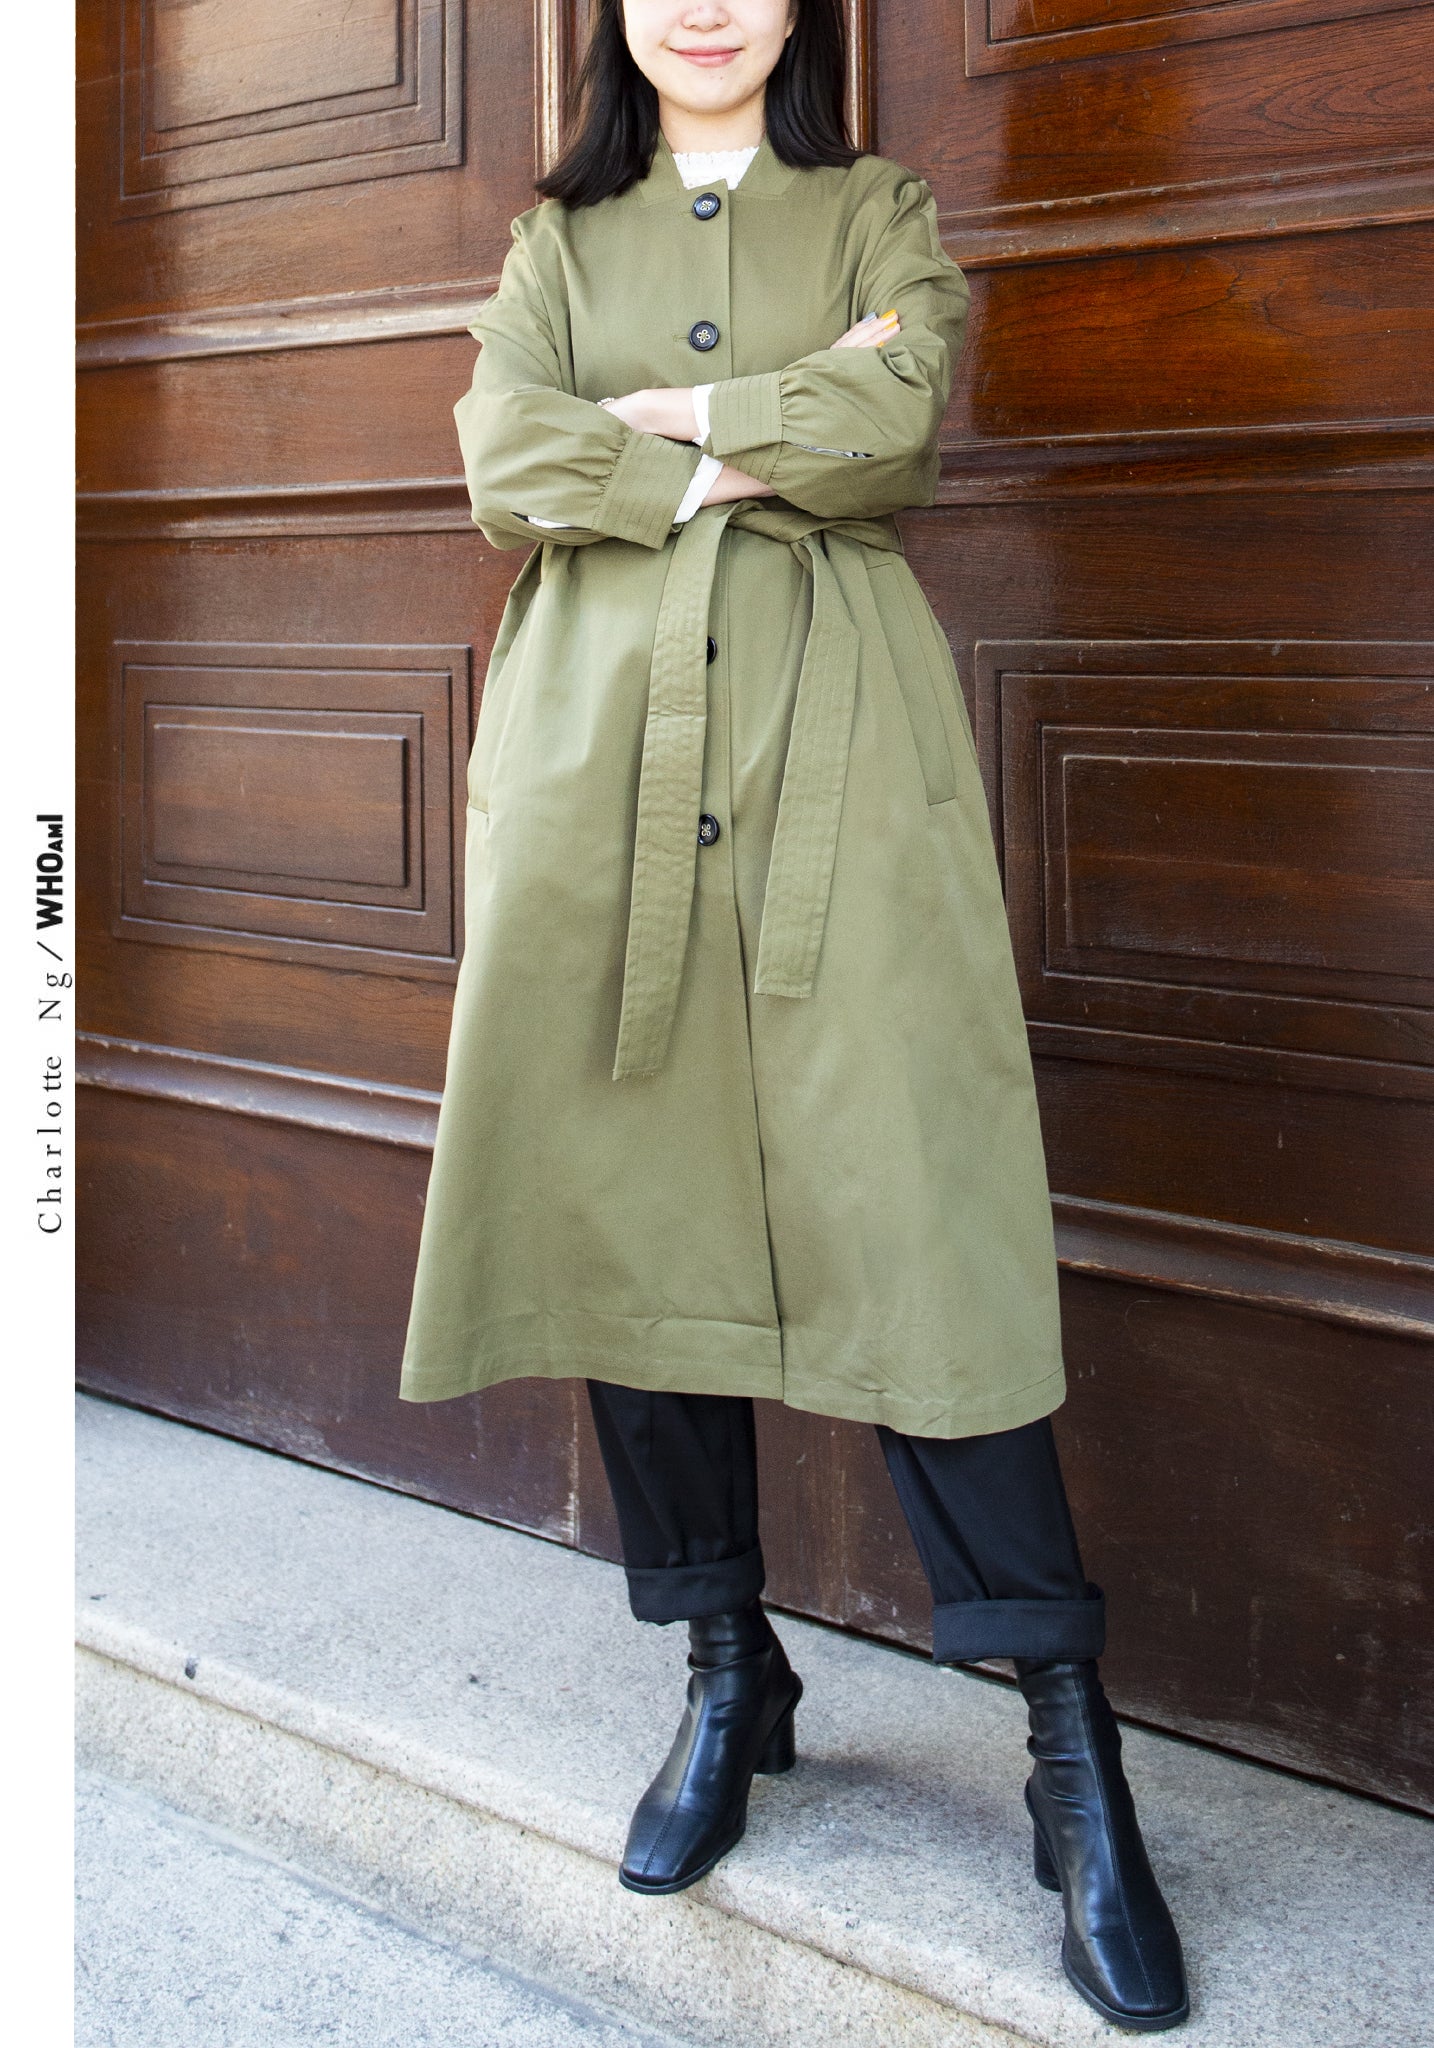 Catch Up With Me Coat Military Green - whoami